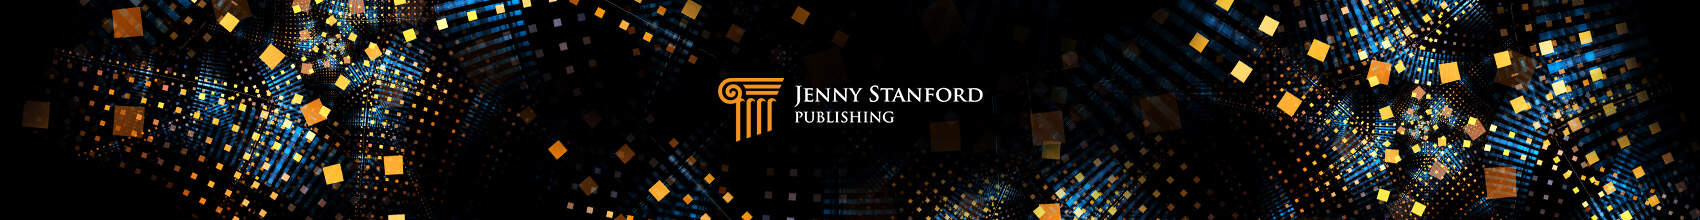 Jenny Stanford Publishing is an independent international publisher with a core focus on micro- and nanoscale science and tech.